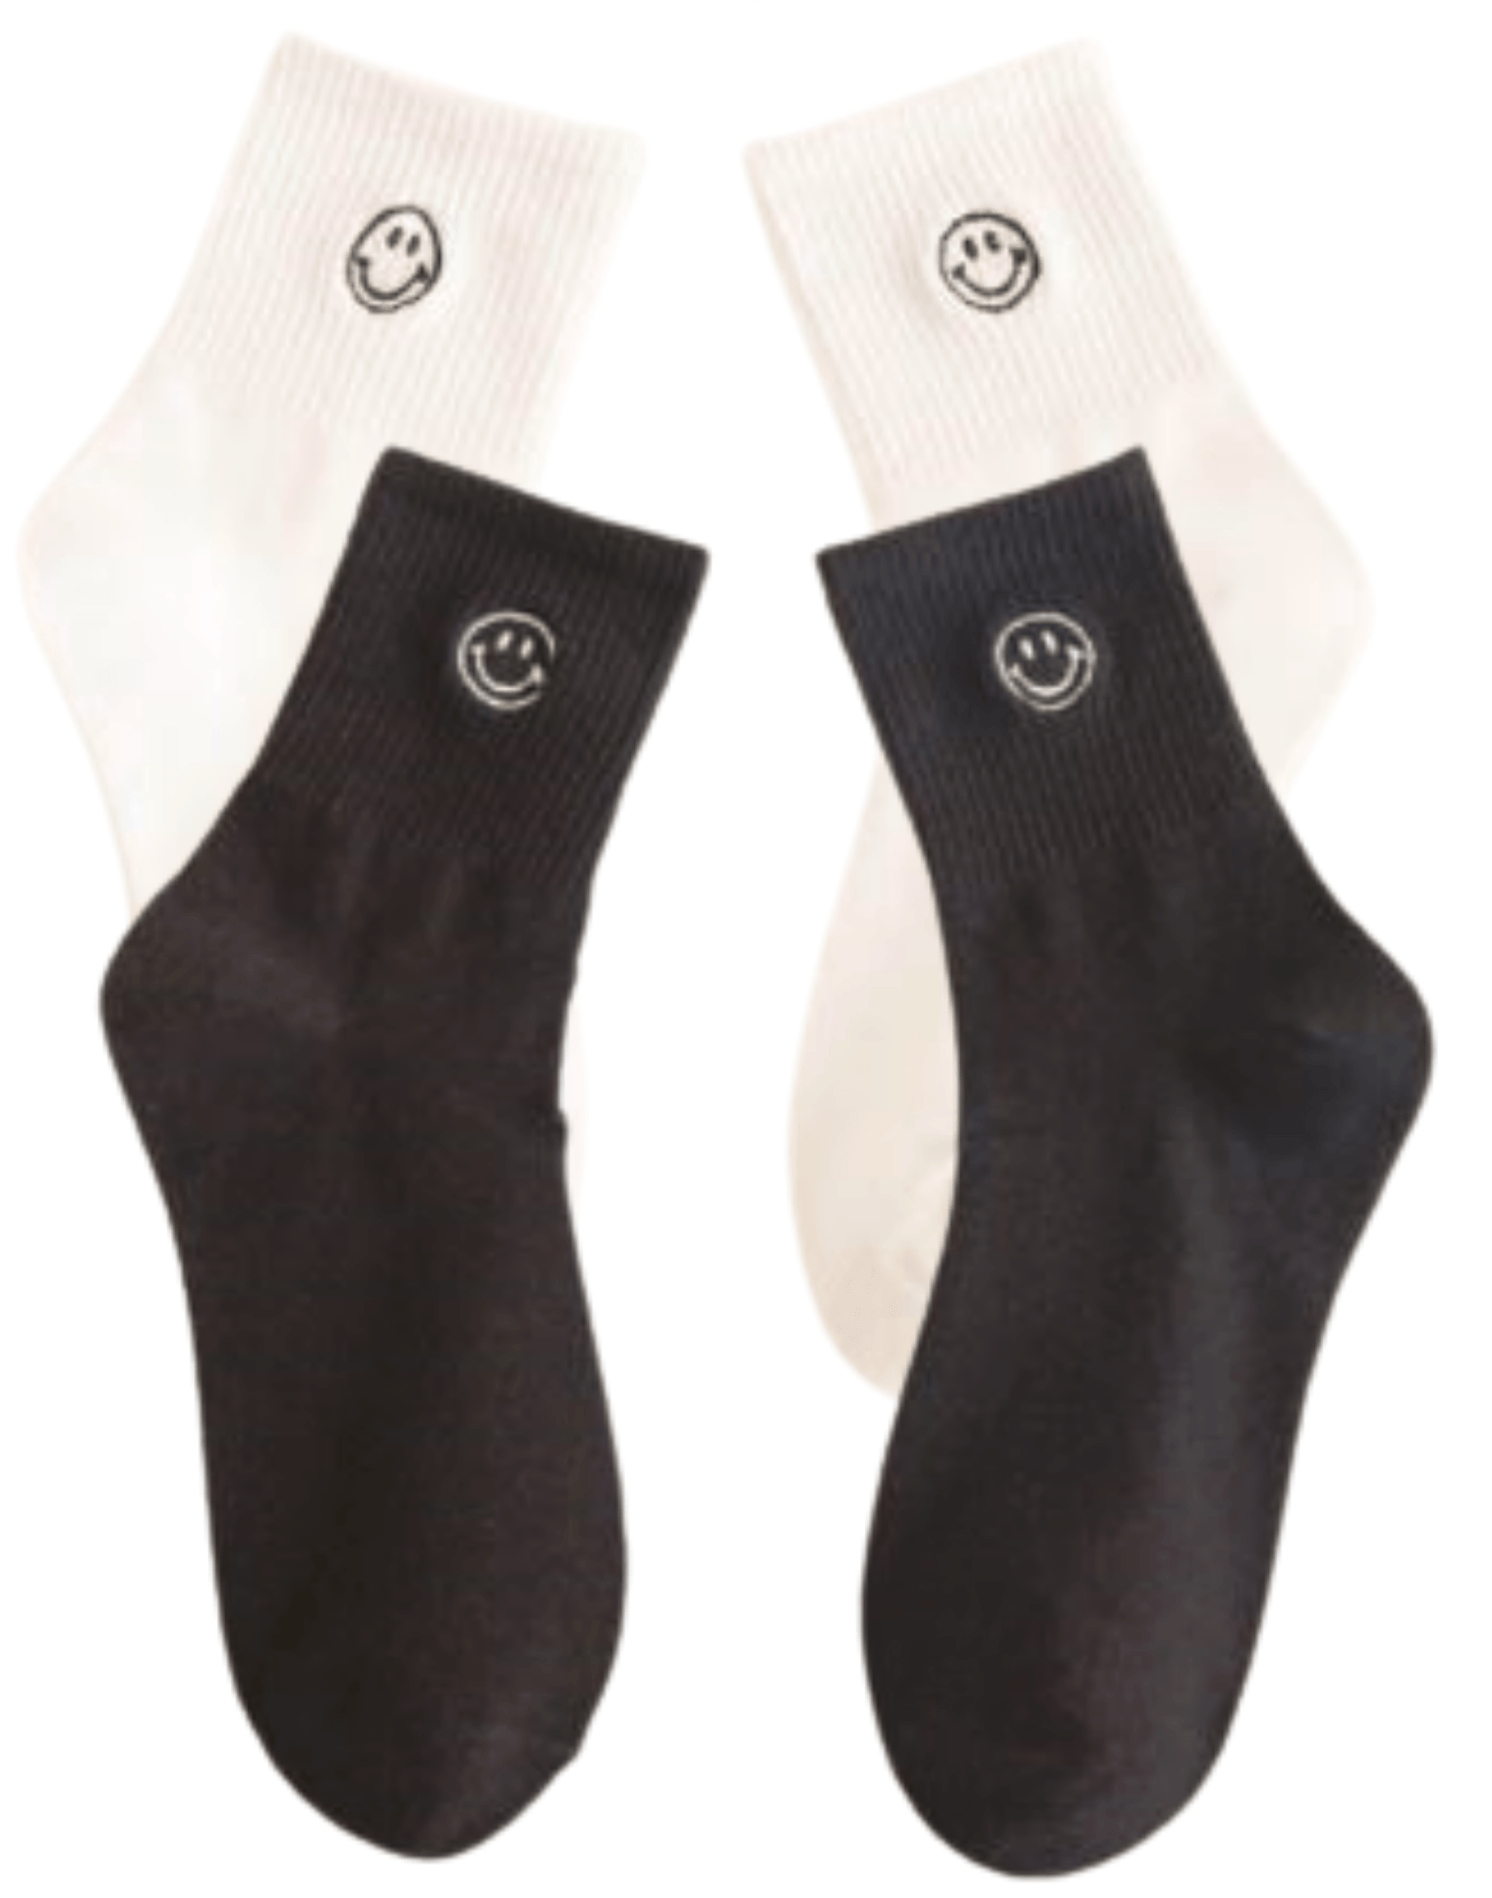 Be Happy Embroidered Smiley Face Women's Socks 1 Pair - The Kindness Cause Gift Ideas That Give Back